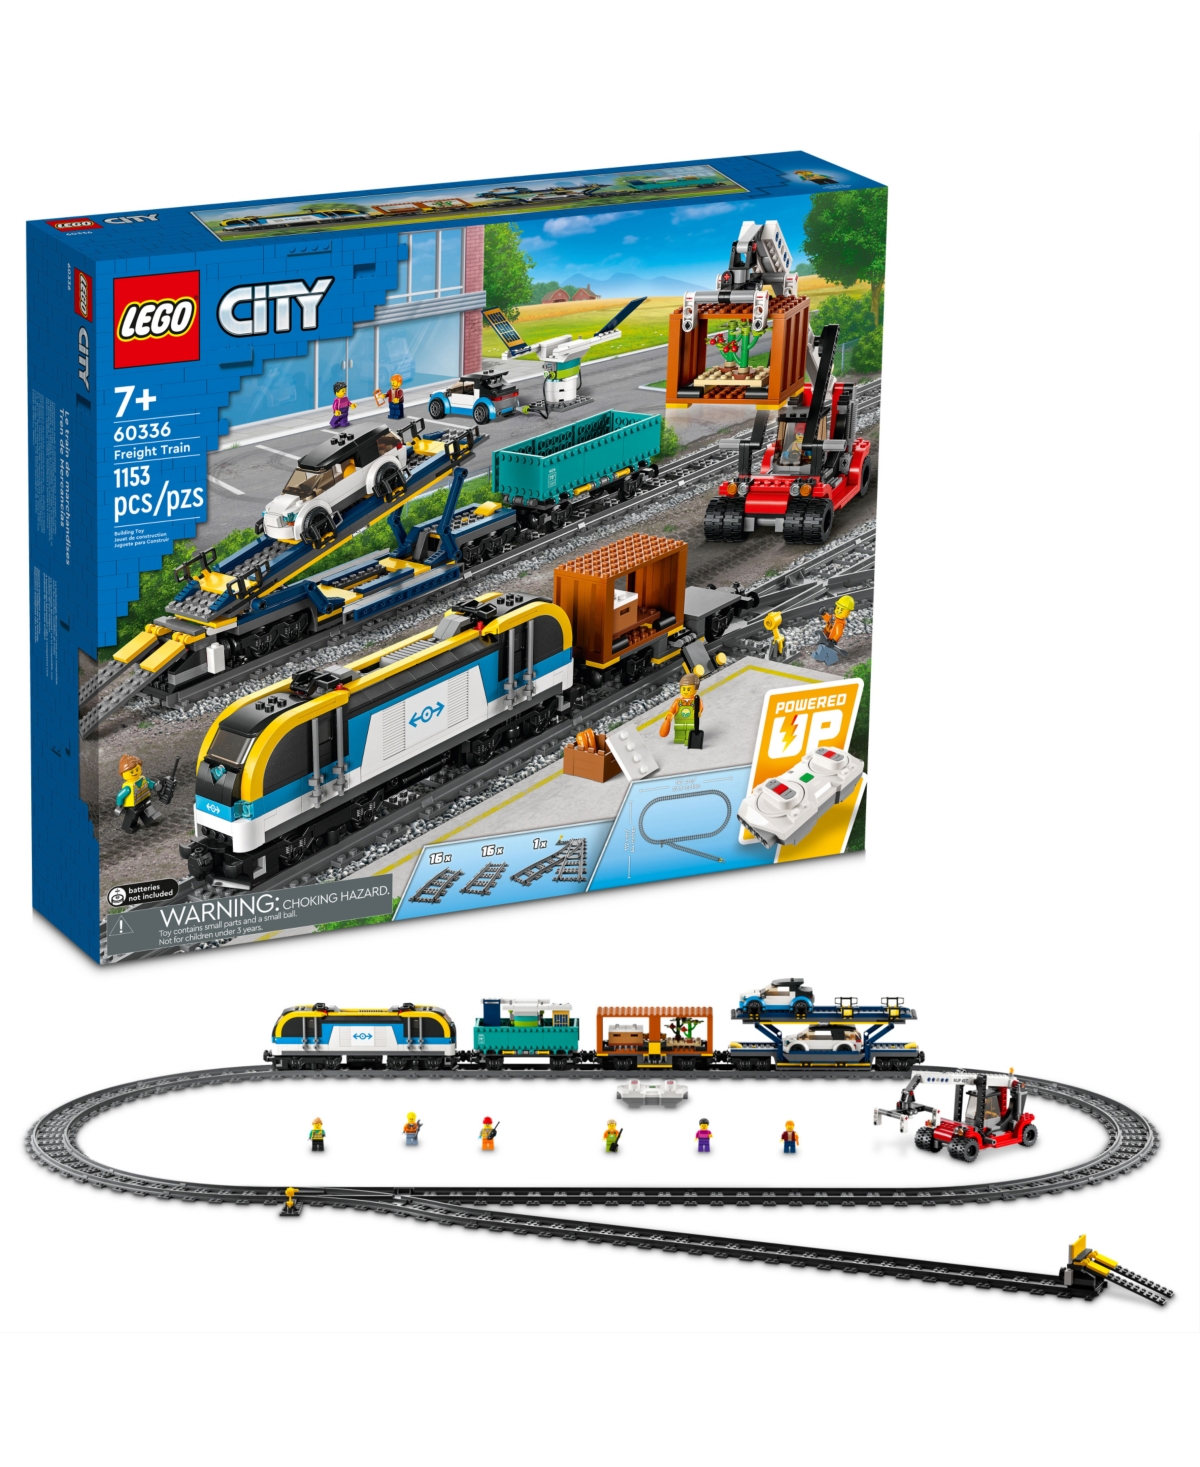 Lego Kids' City Freight Train 60336 Toy Building Set With 6 Minifigures In No Color